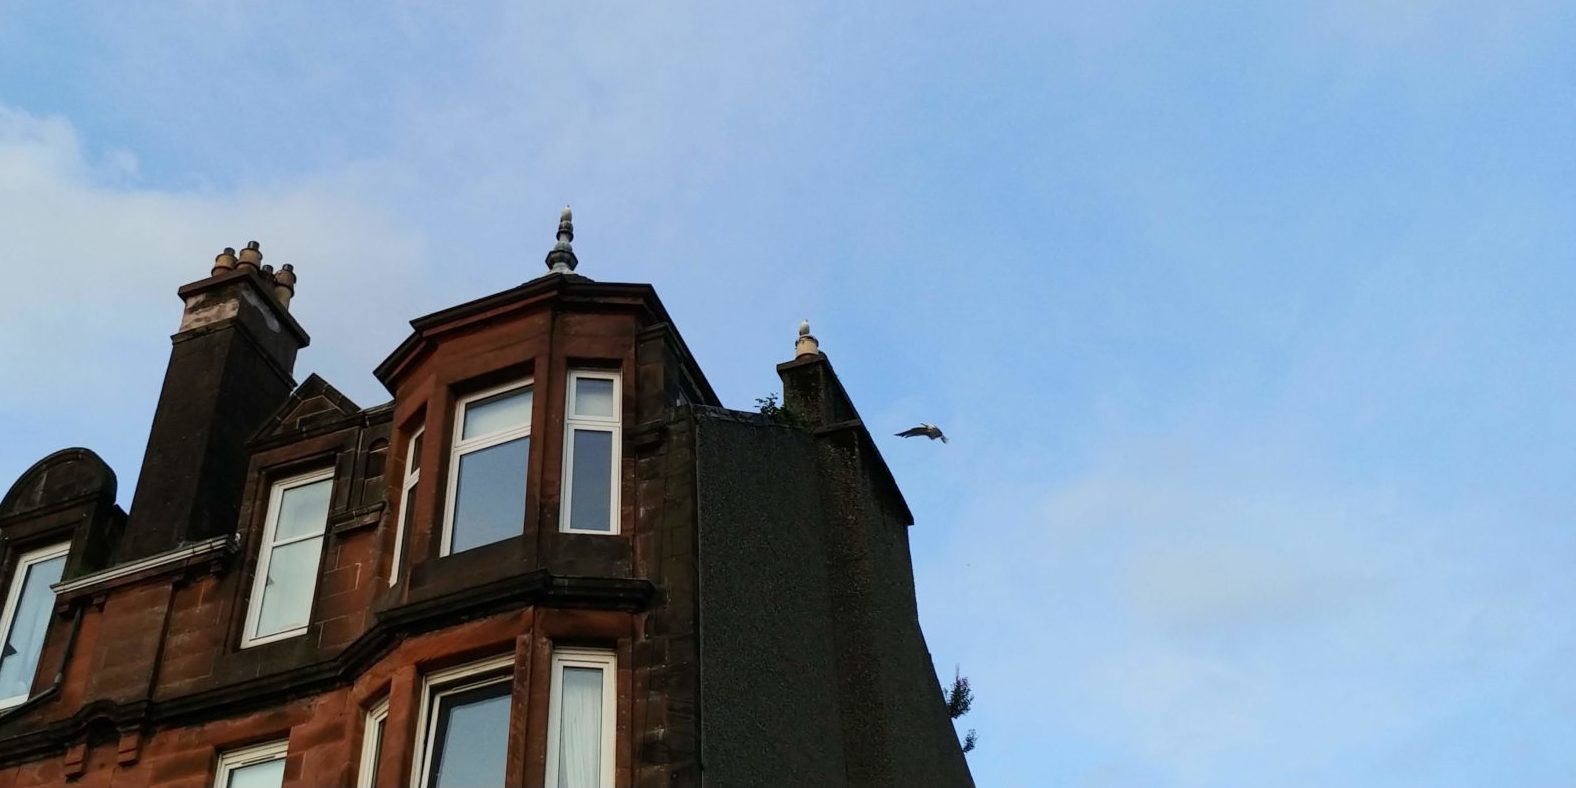 Seagull of the month for August 2019